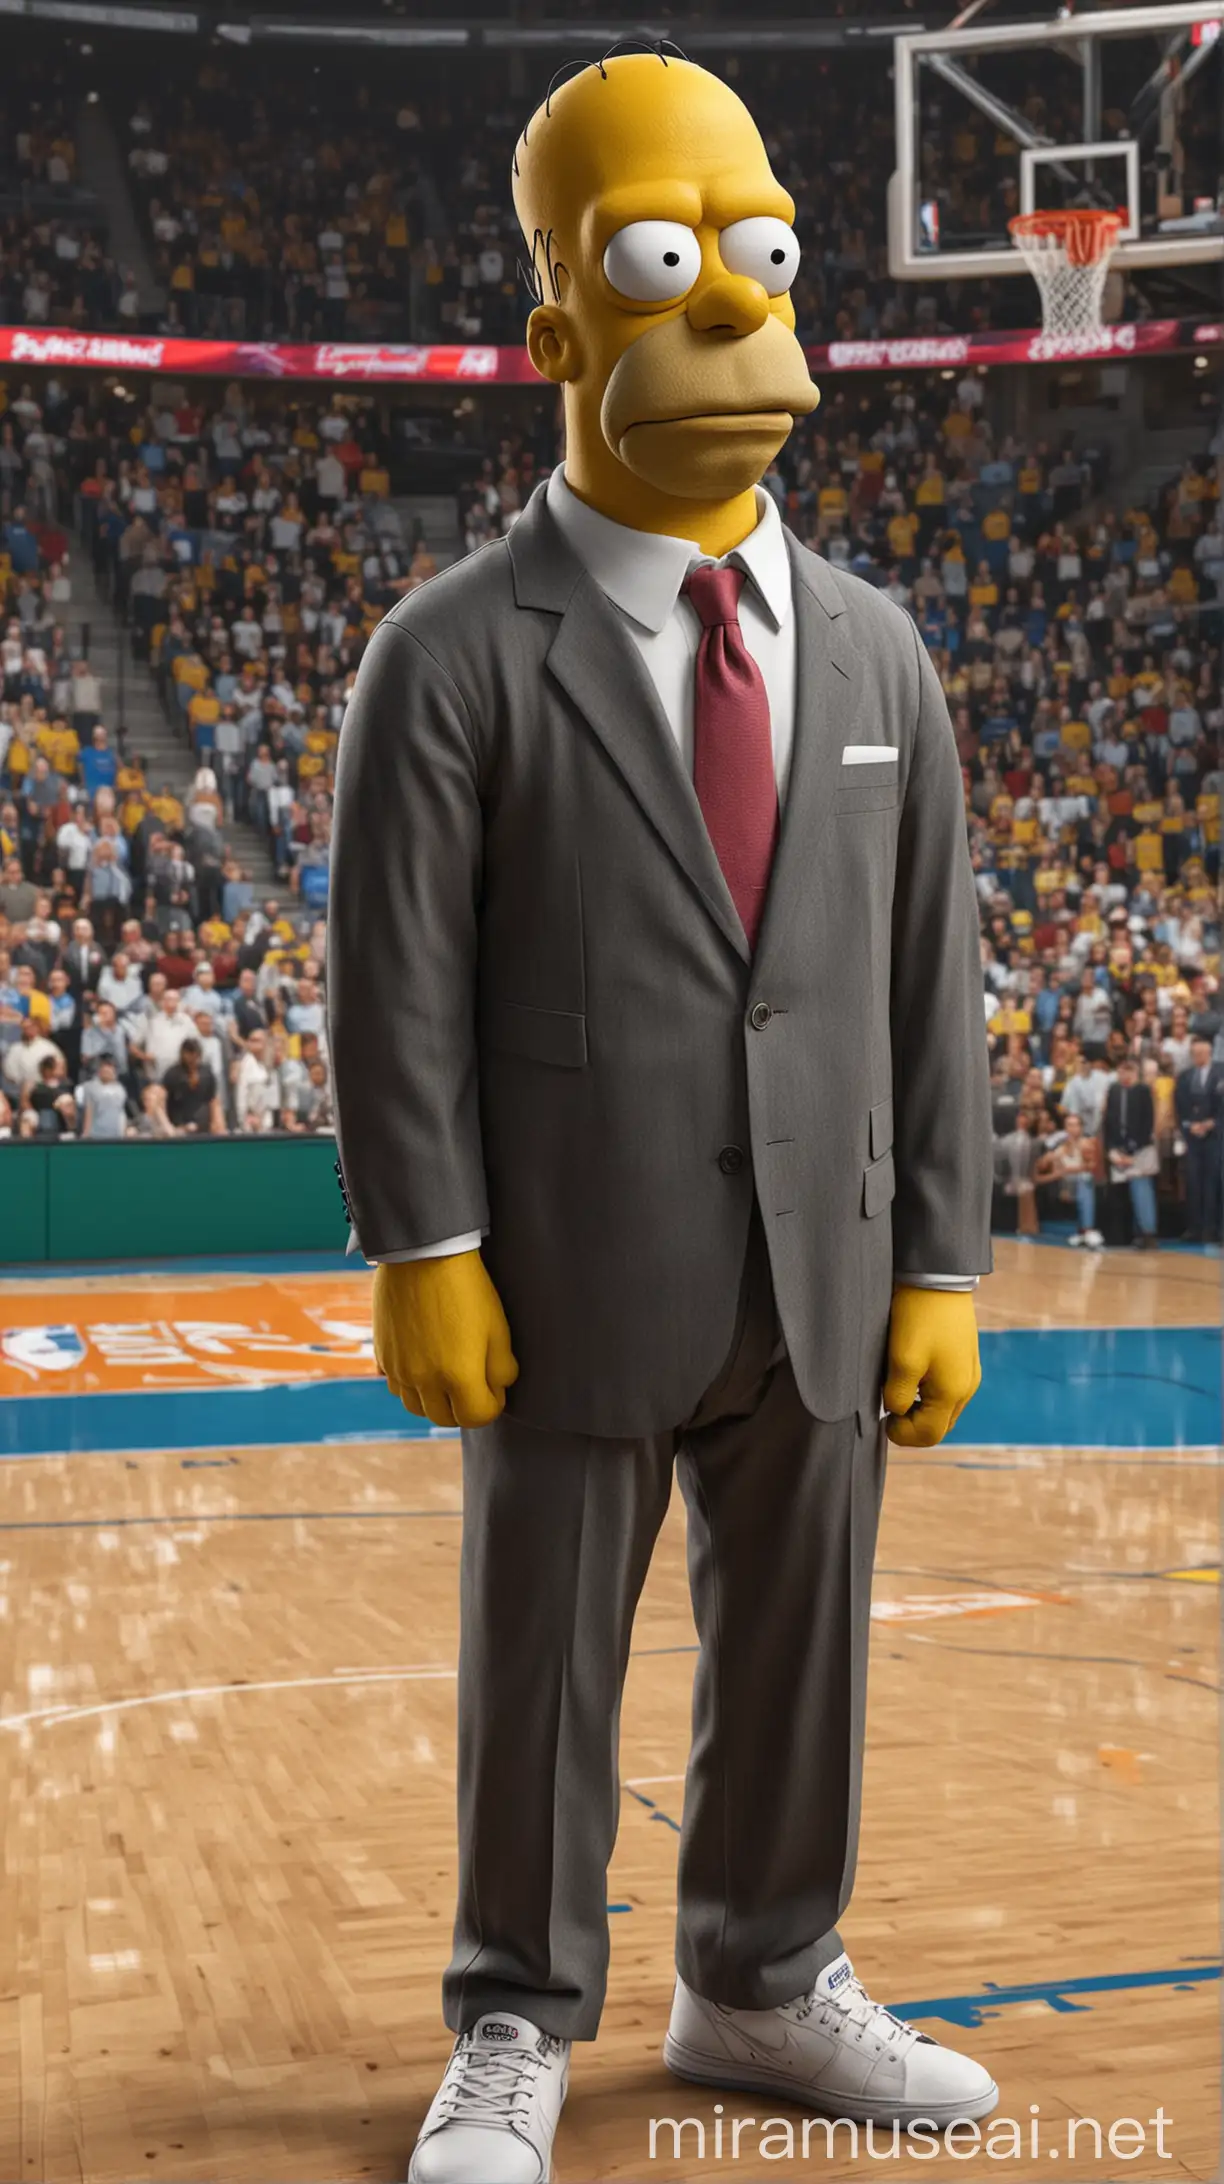 Homer Simpson Hyper Real Portrait on NBA Court in Suit